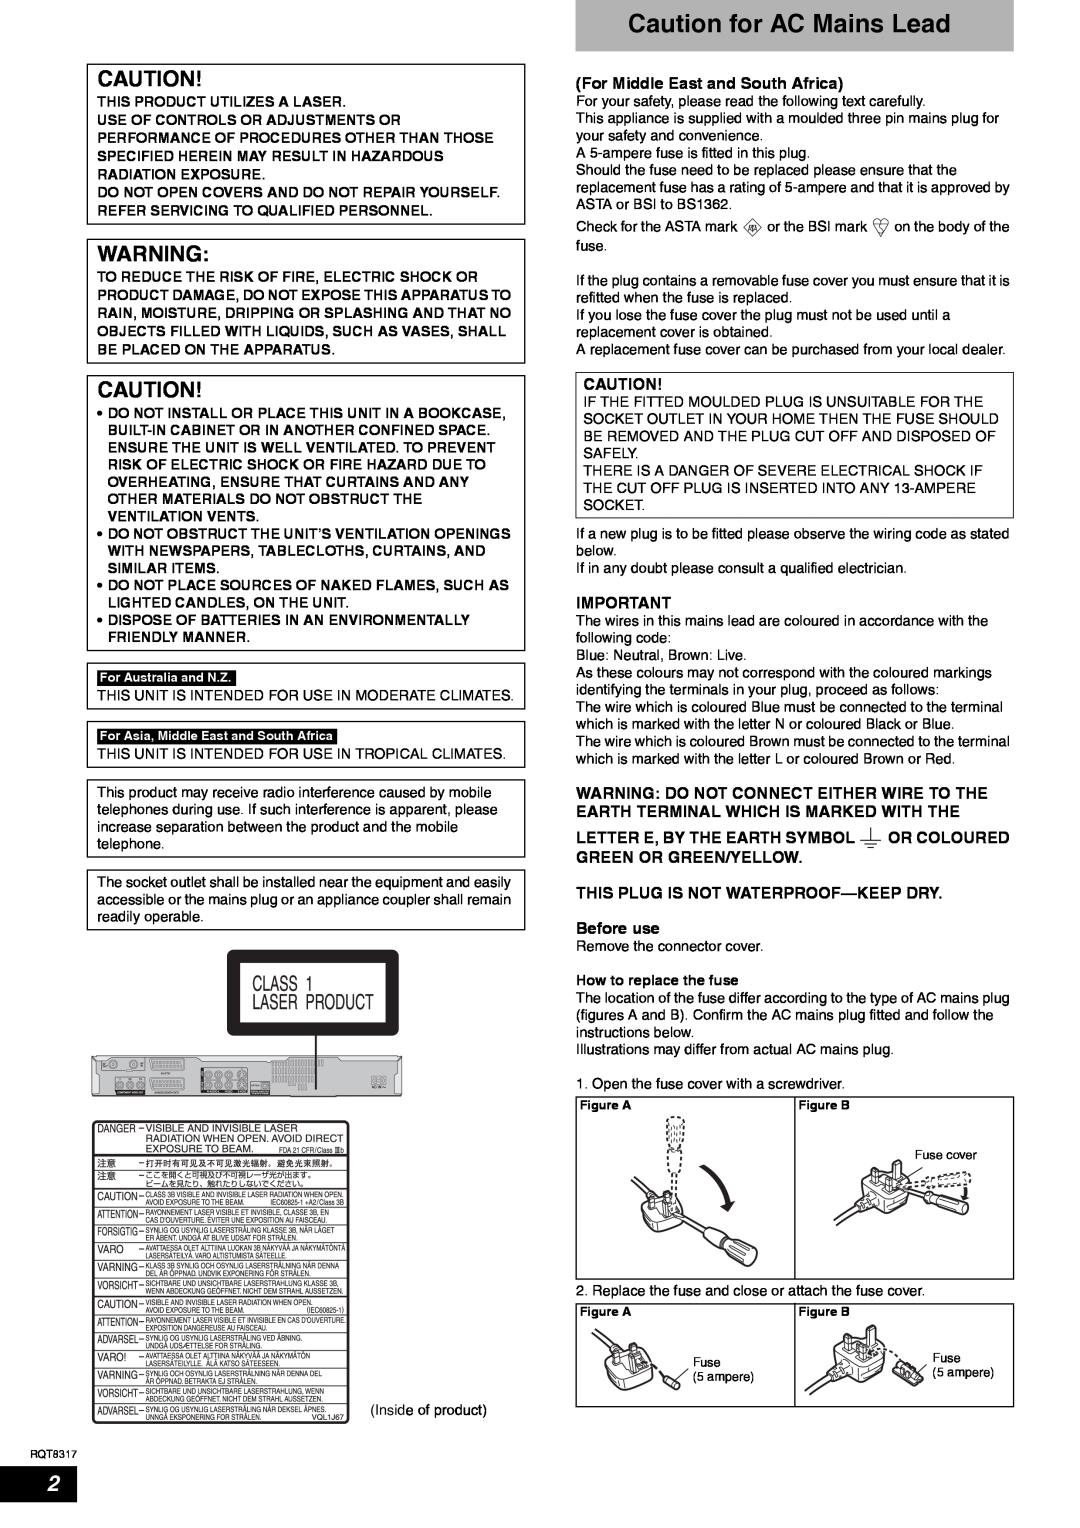 Panasonic DMR-ES15 manual Caution for AC Mains Lead, For Middle East and South Africa 